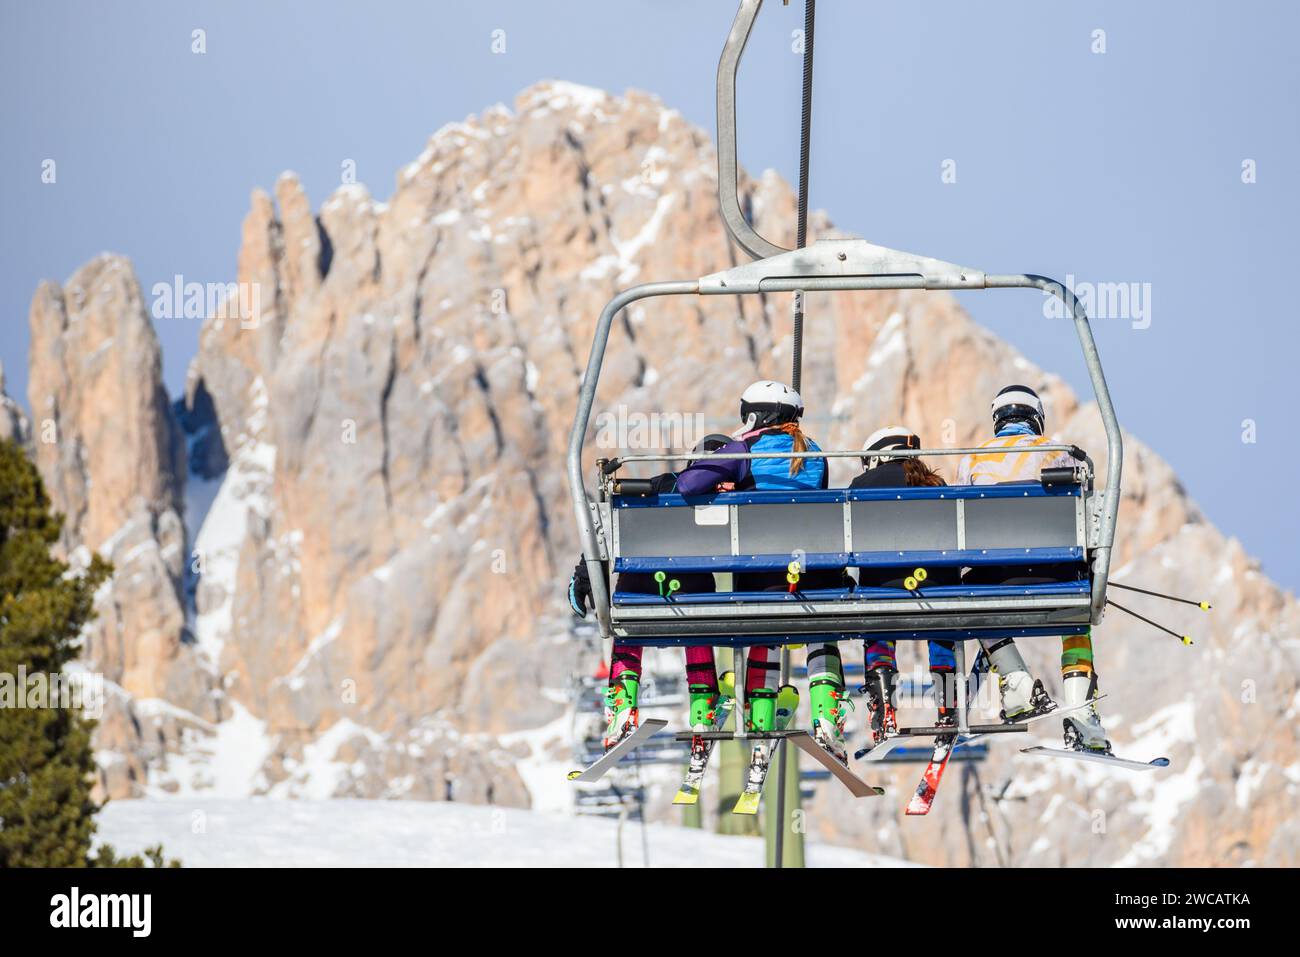 Skiers riding a chairlift in a mountain resort in winter. a Snowy rocky peak is in background. Stock Photo